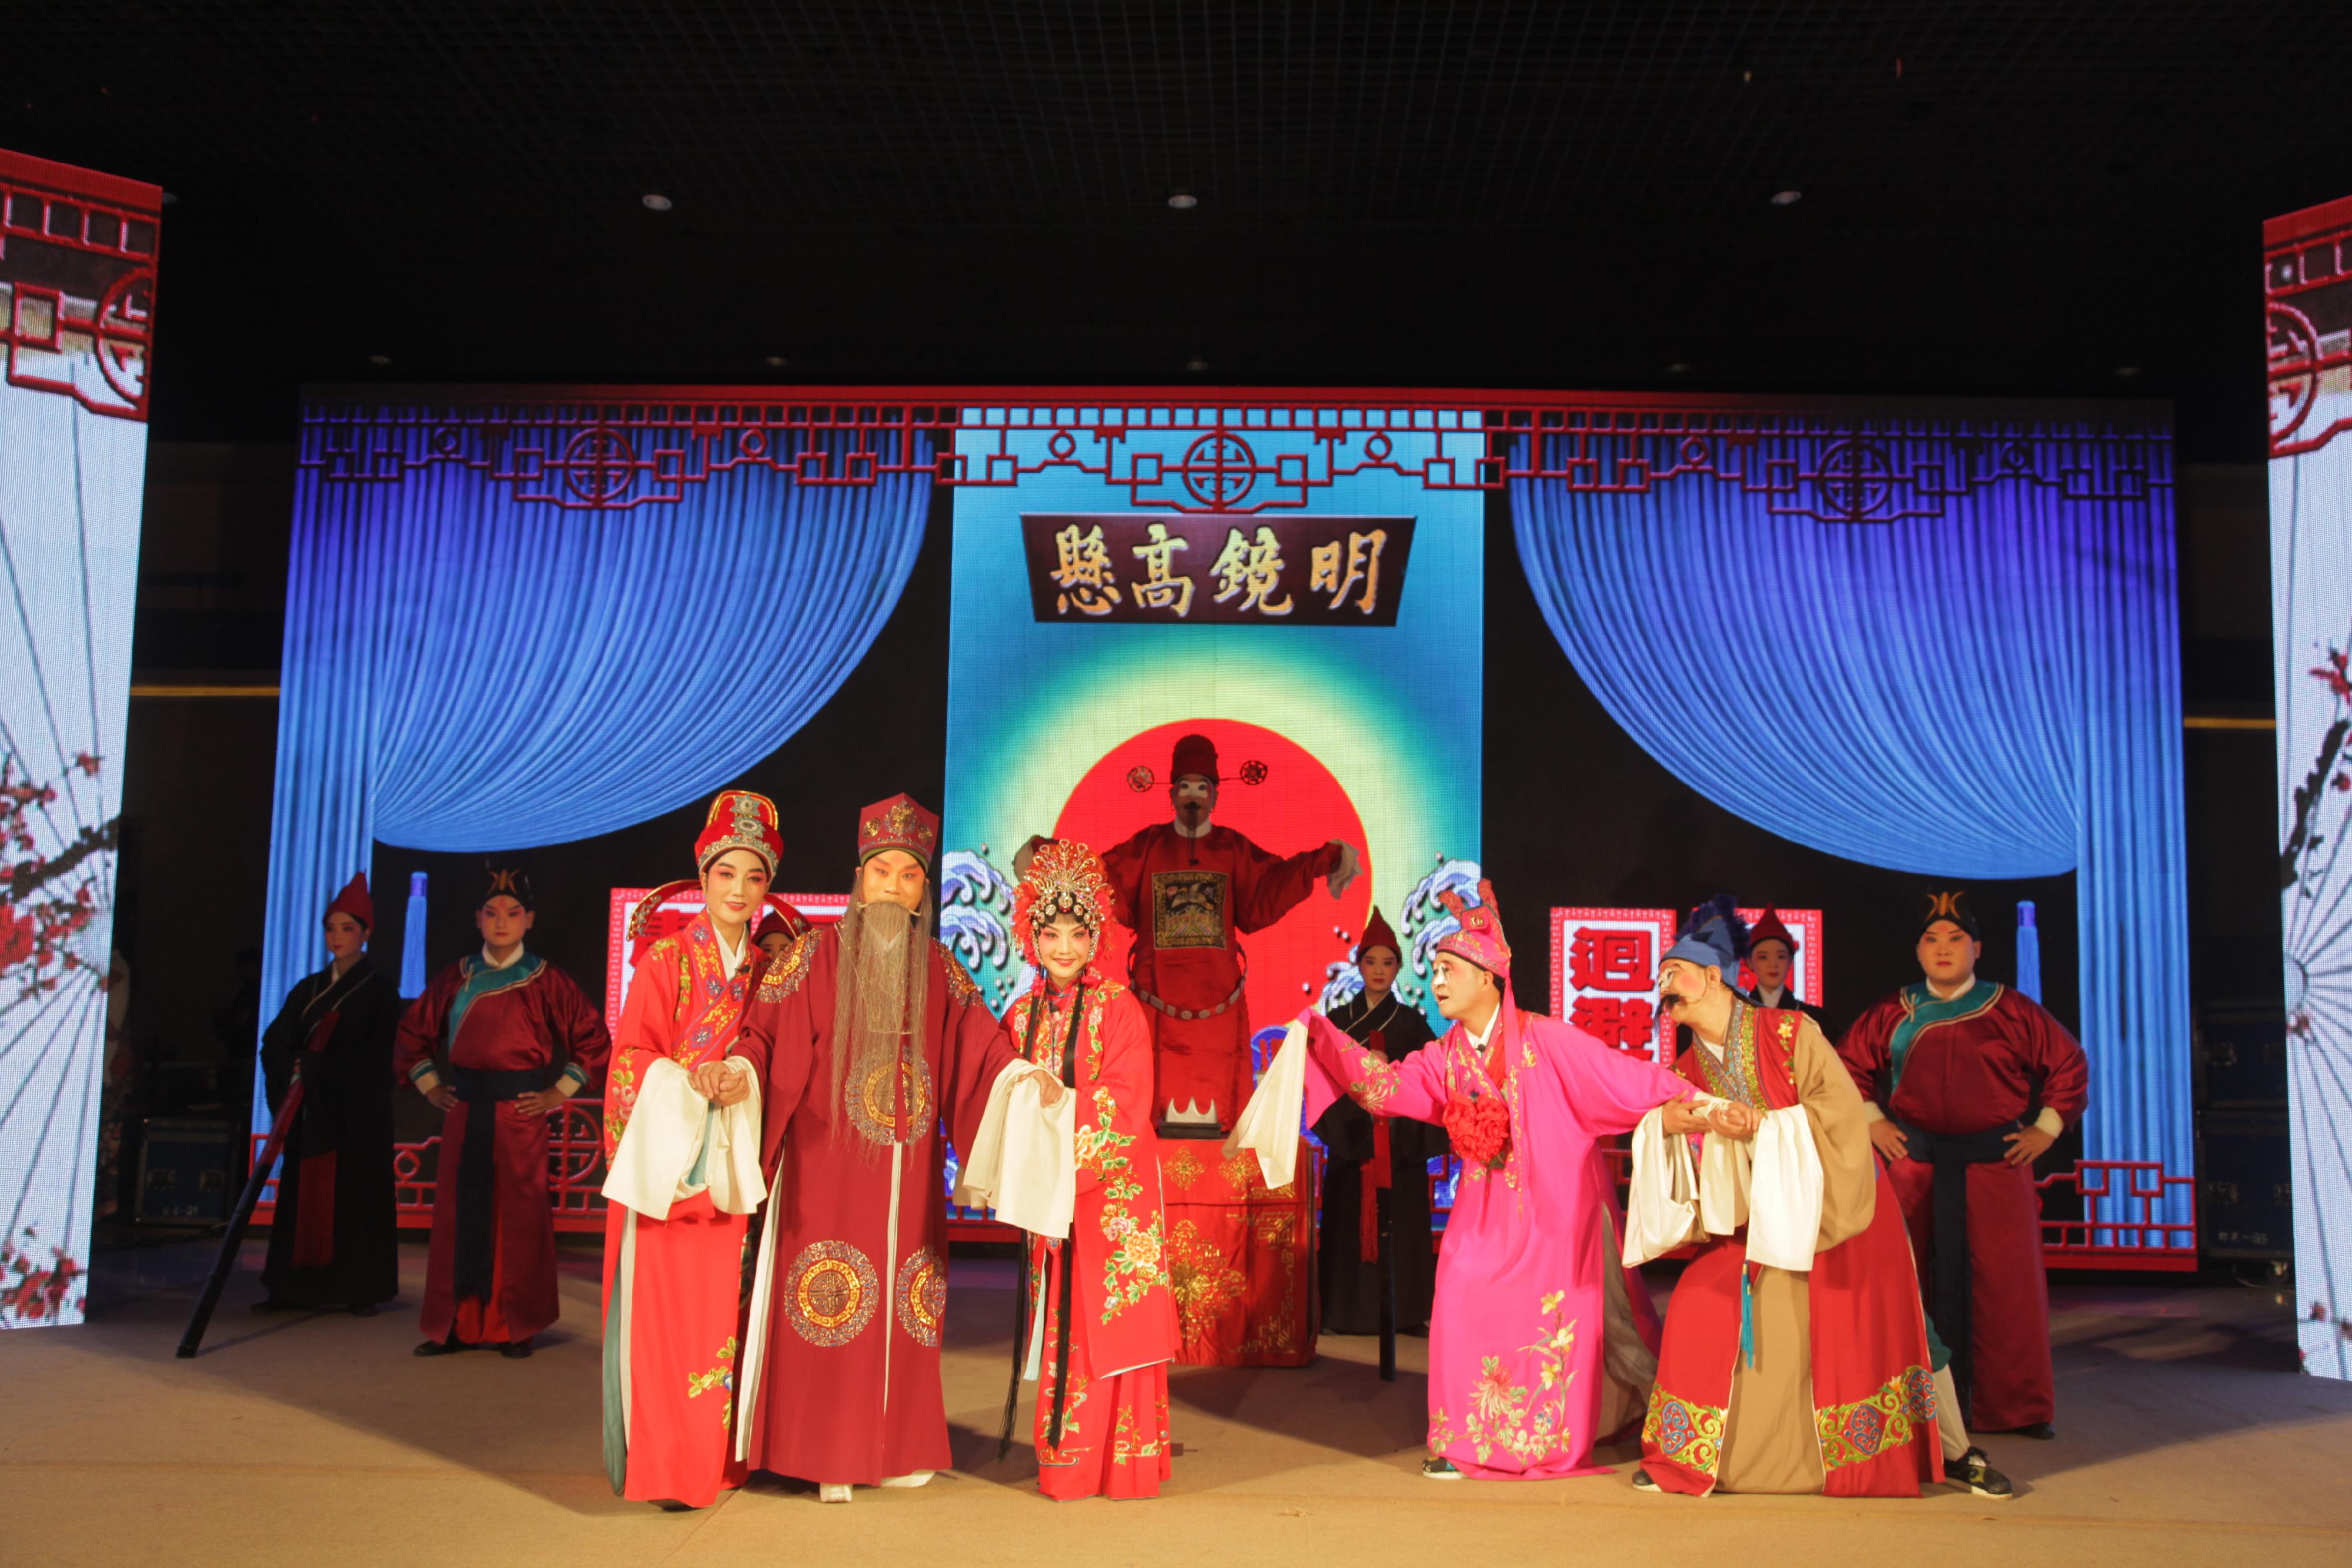 The Leisure and Cultural Services Department has invited the Centre for the Safeguarding of Qu Opera of Henan to make its debut in Hong Kong in June for three performances of iconic plays at this year's Chinese Opera Festival. Photo shows a scene of "Wedding in a Snowstorm".